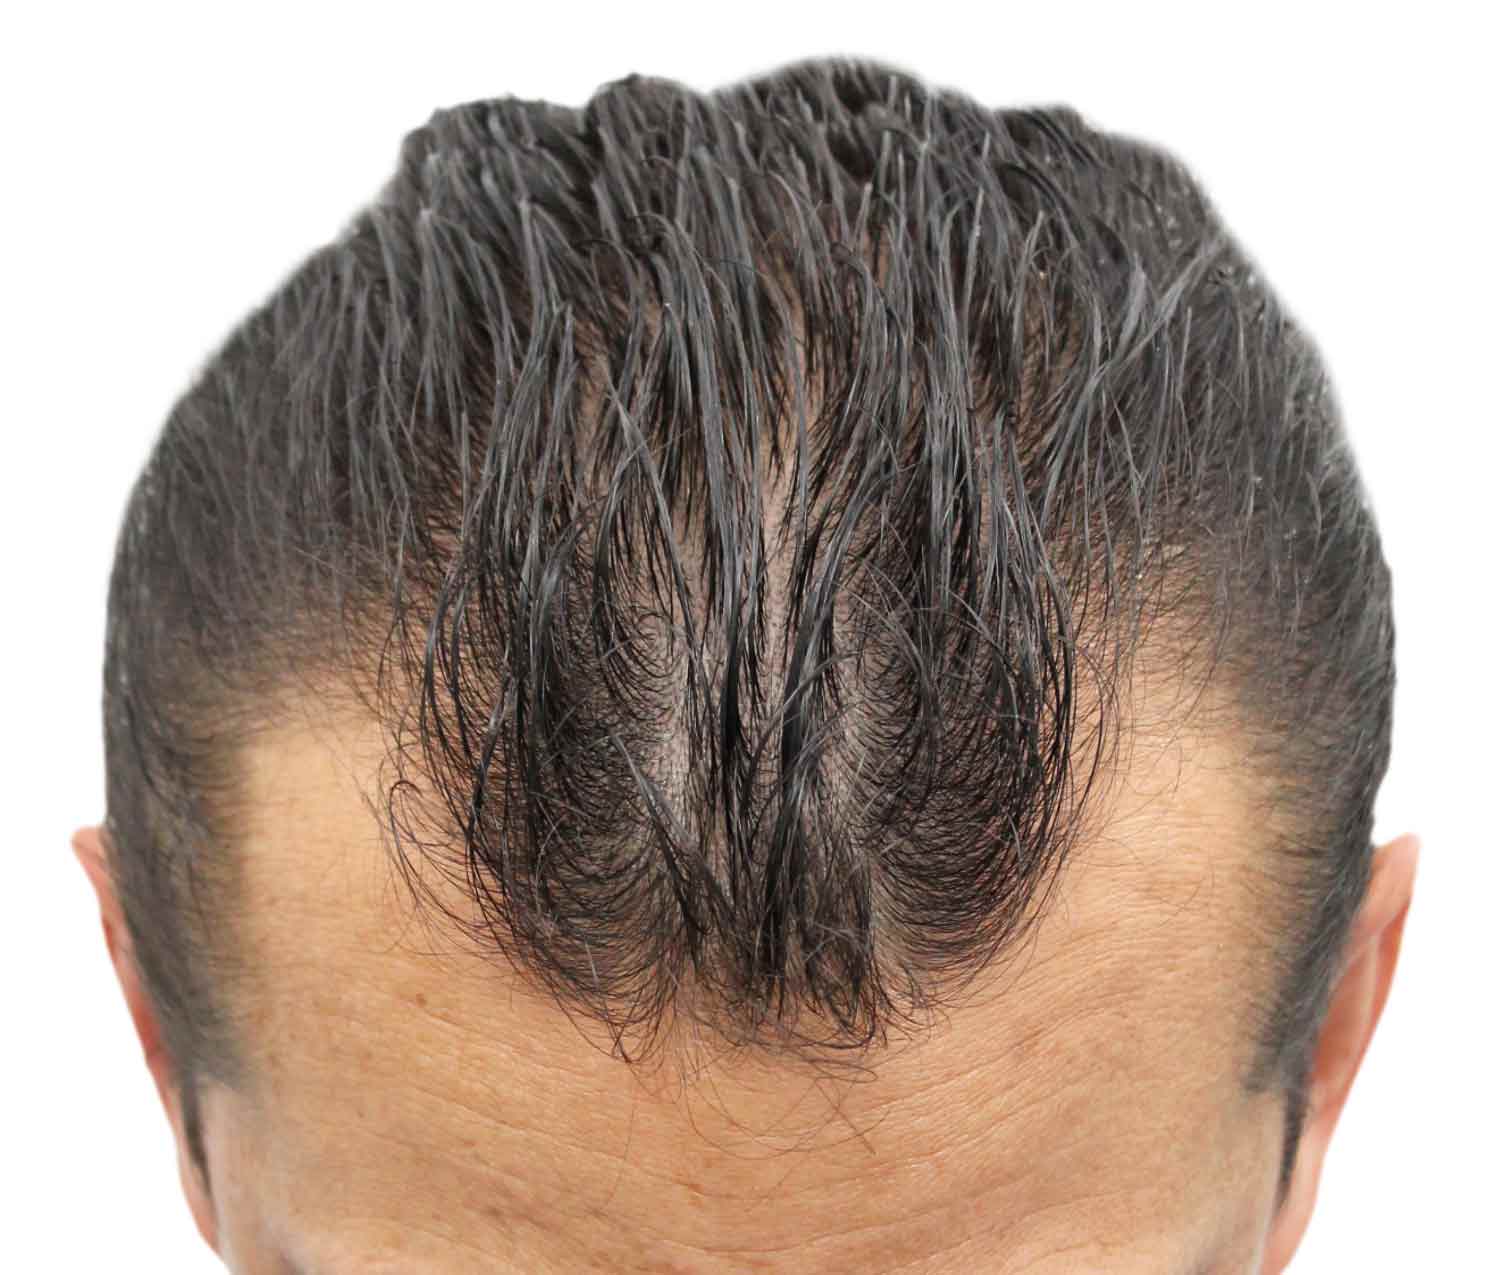 Male with great hair loss